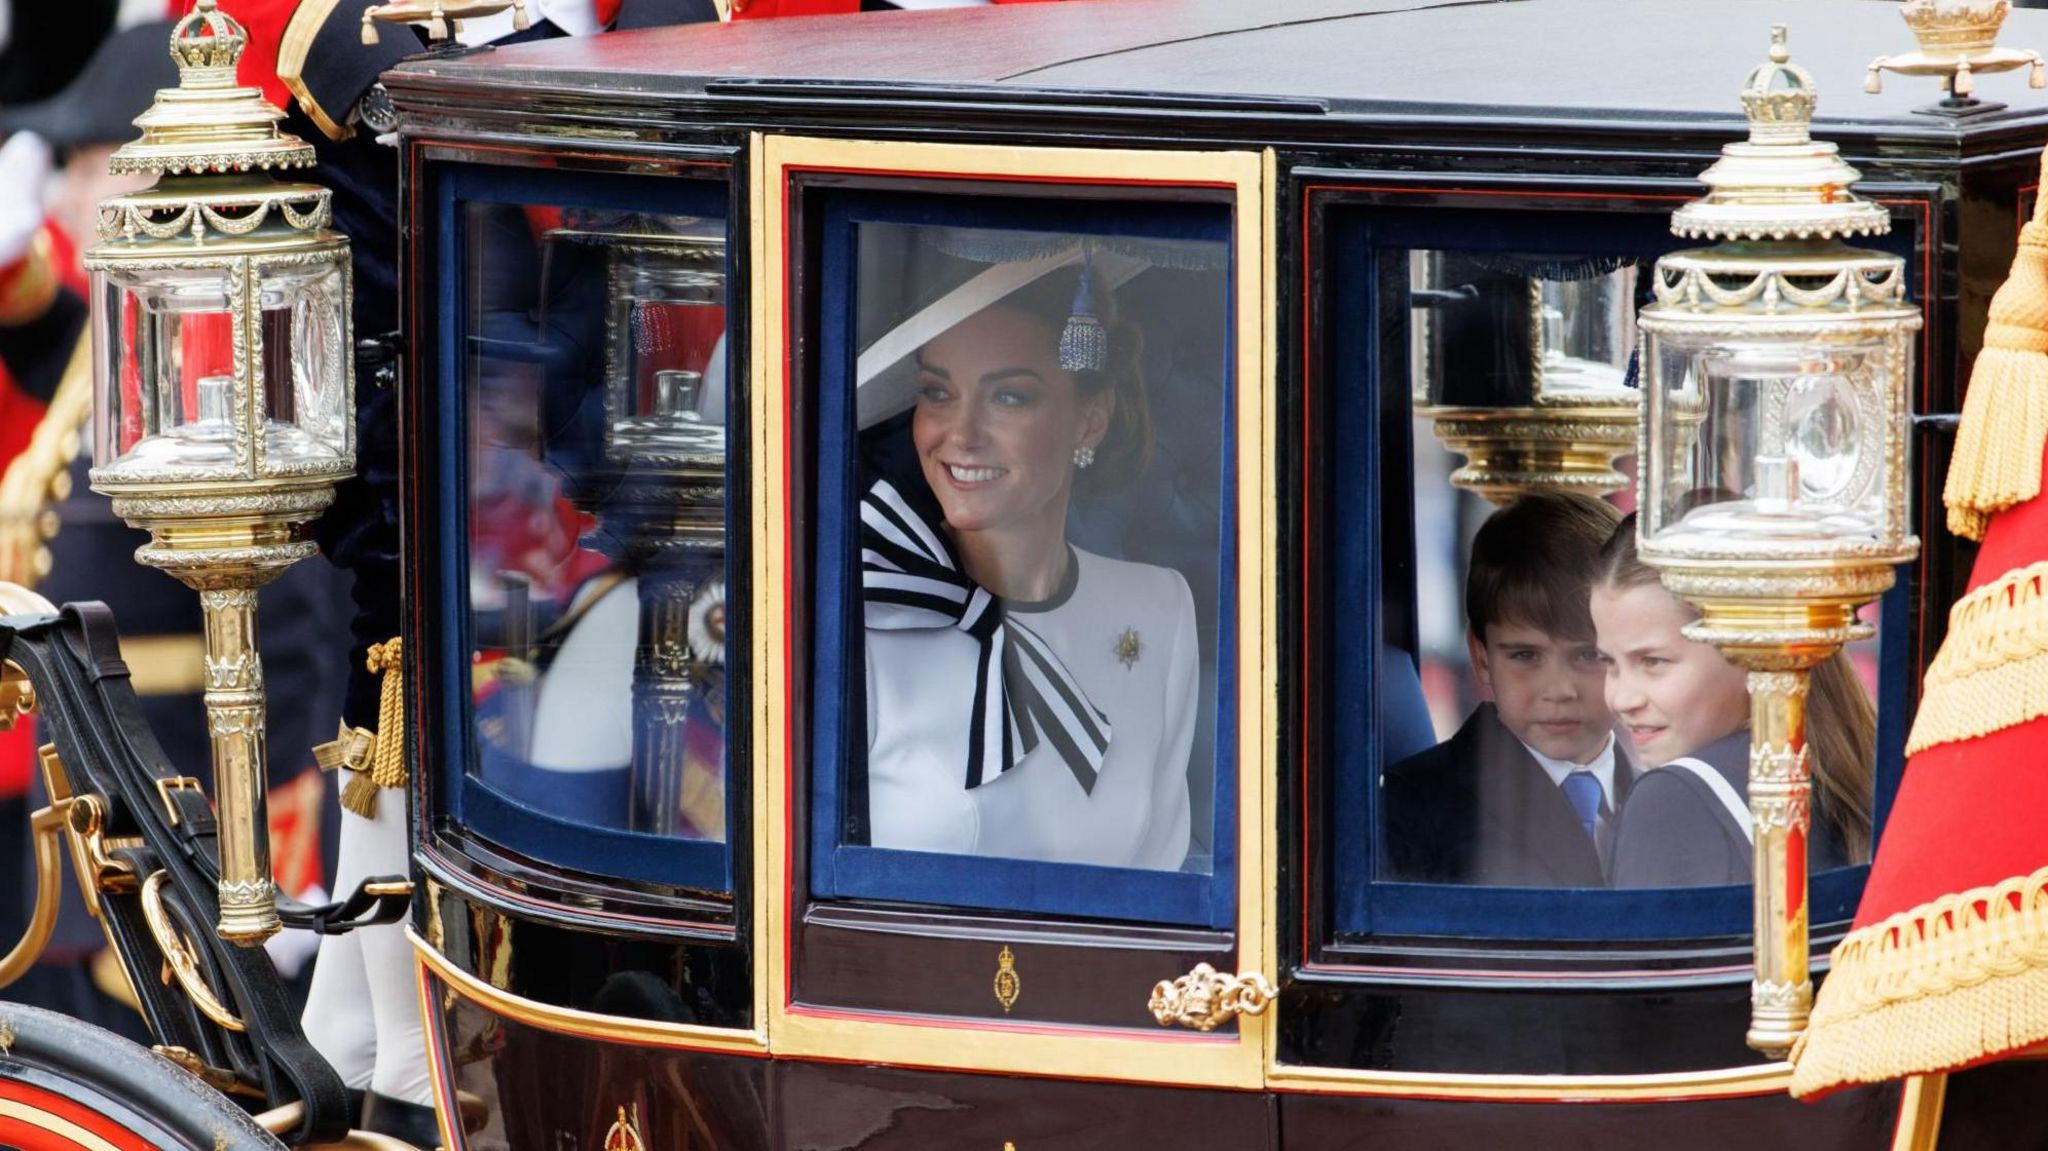 Catherine smiling as she looks through gold carriage window, alongside Louis and Charlotte